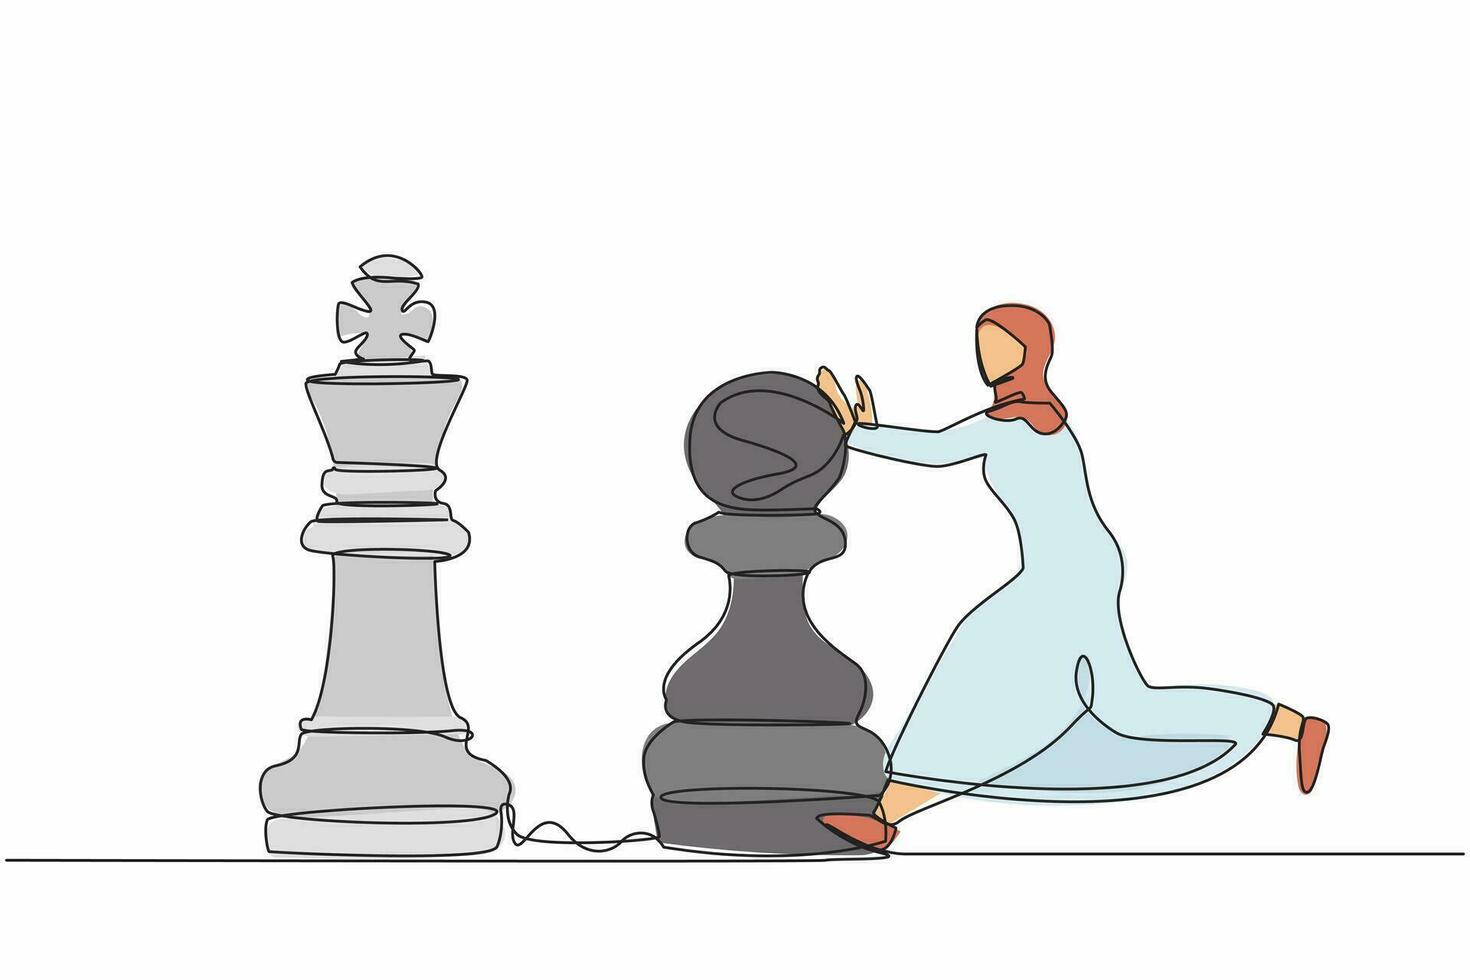 Single continuous line drawing attractive Arabian businesswoman push huge pawn chess piece to beat king. Strategic thinking, smart move in business play game. One line draw design vector illustration